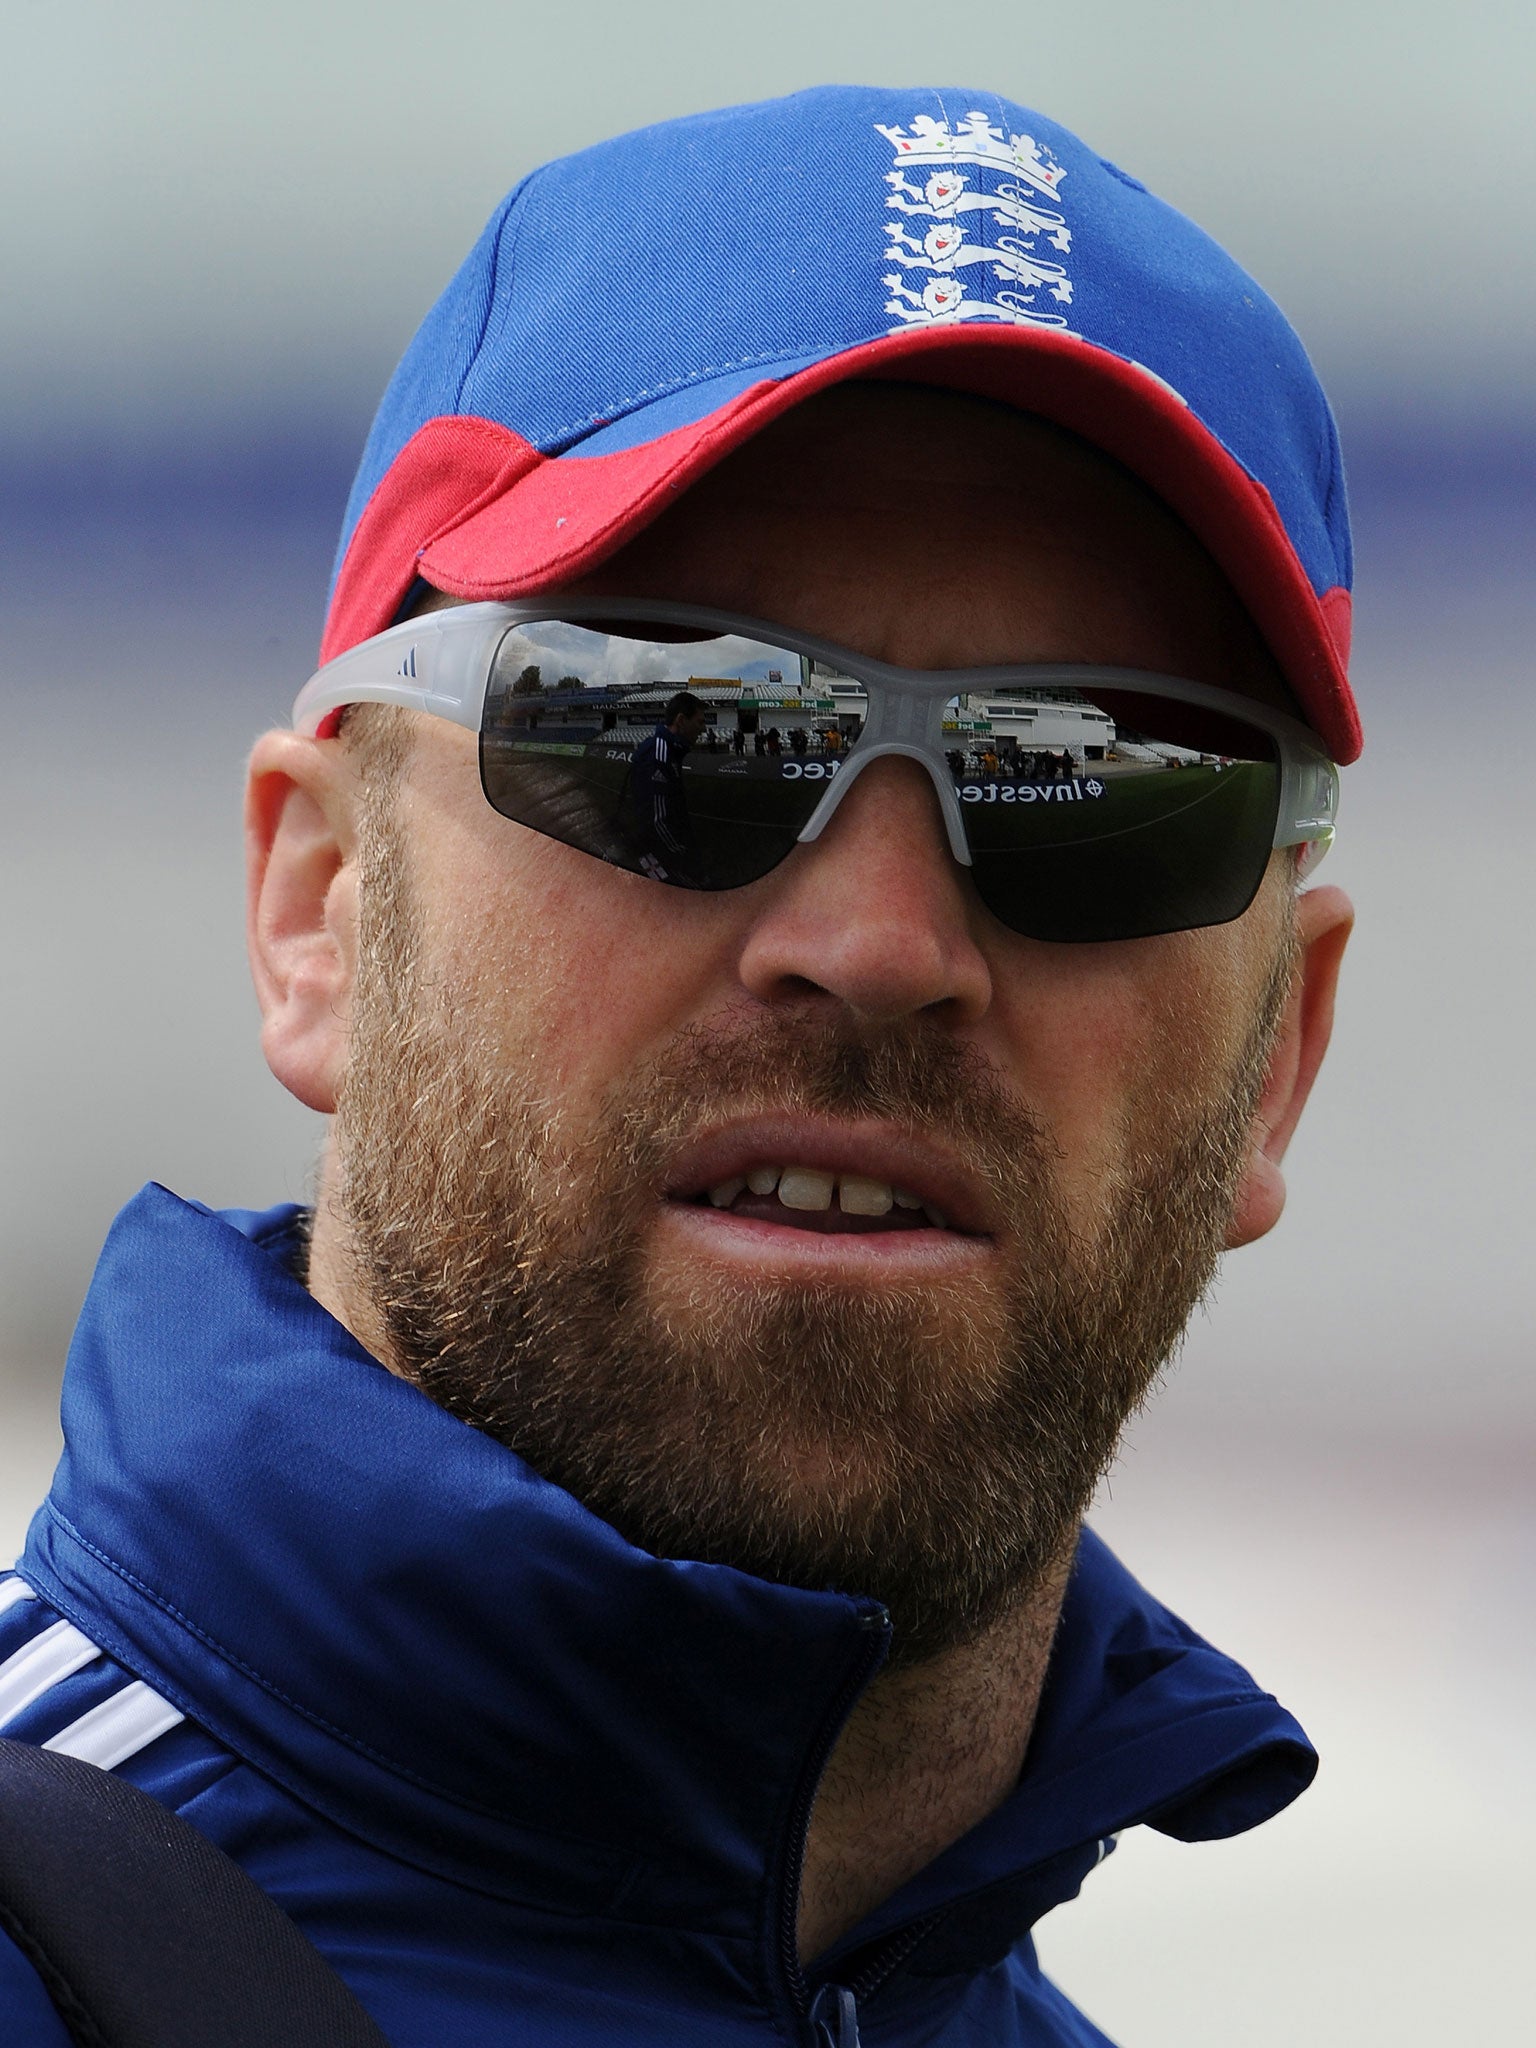 Matt Prior, who will play for England in the warm-up against Essex at Chelmsford starting on Sunday